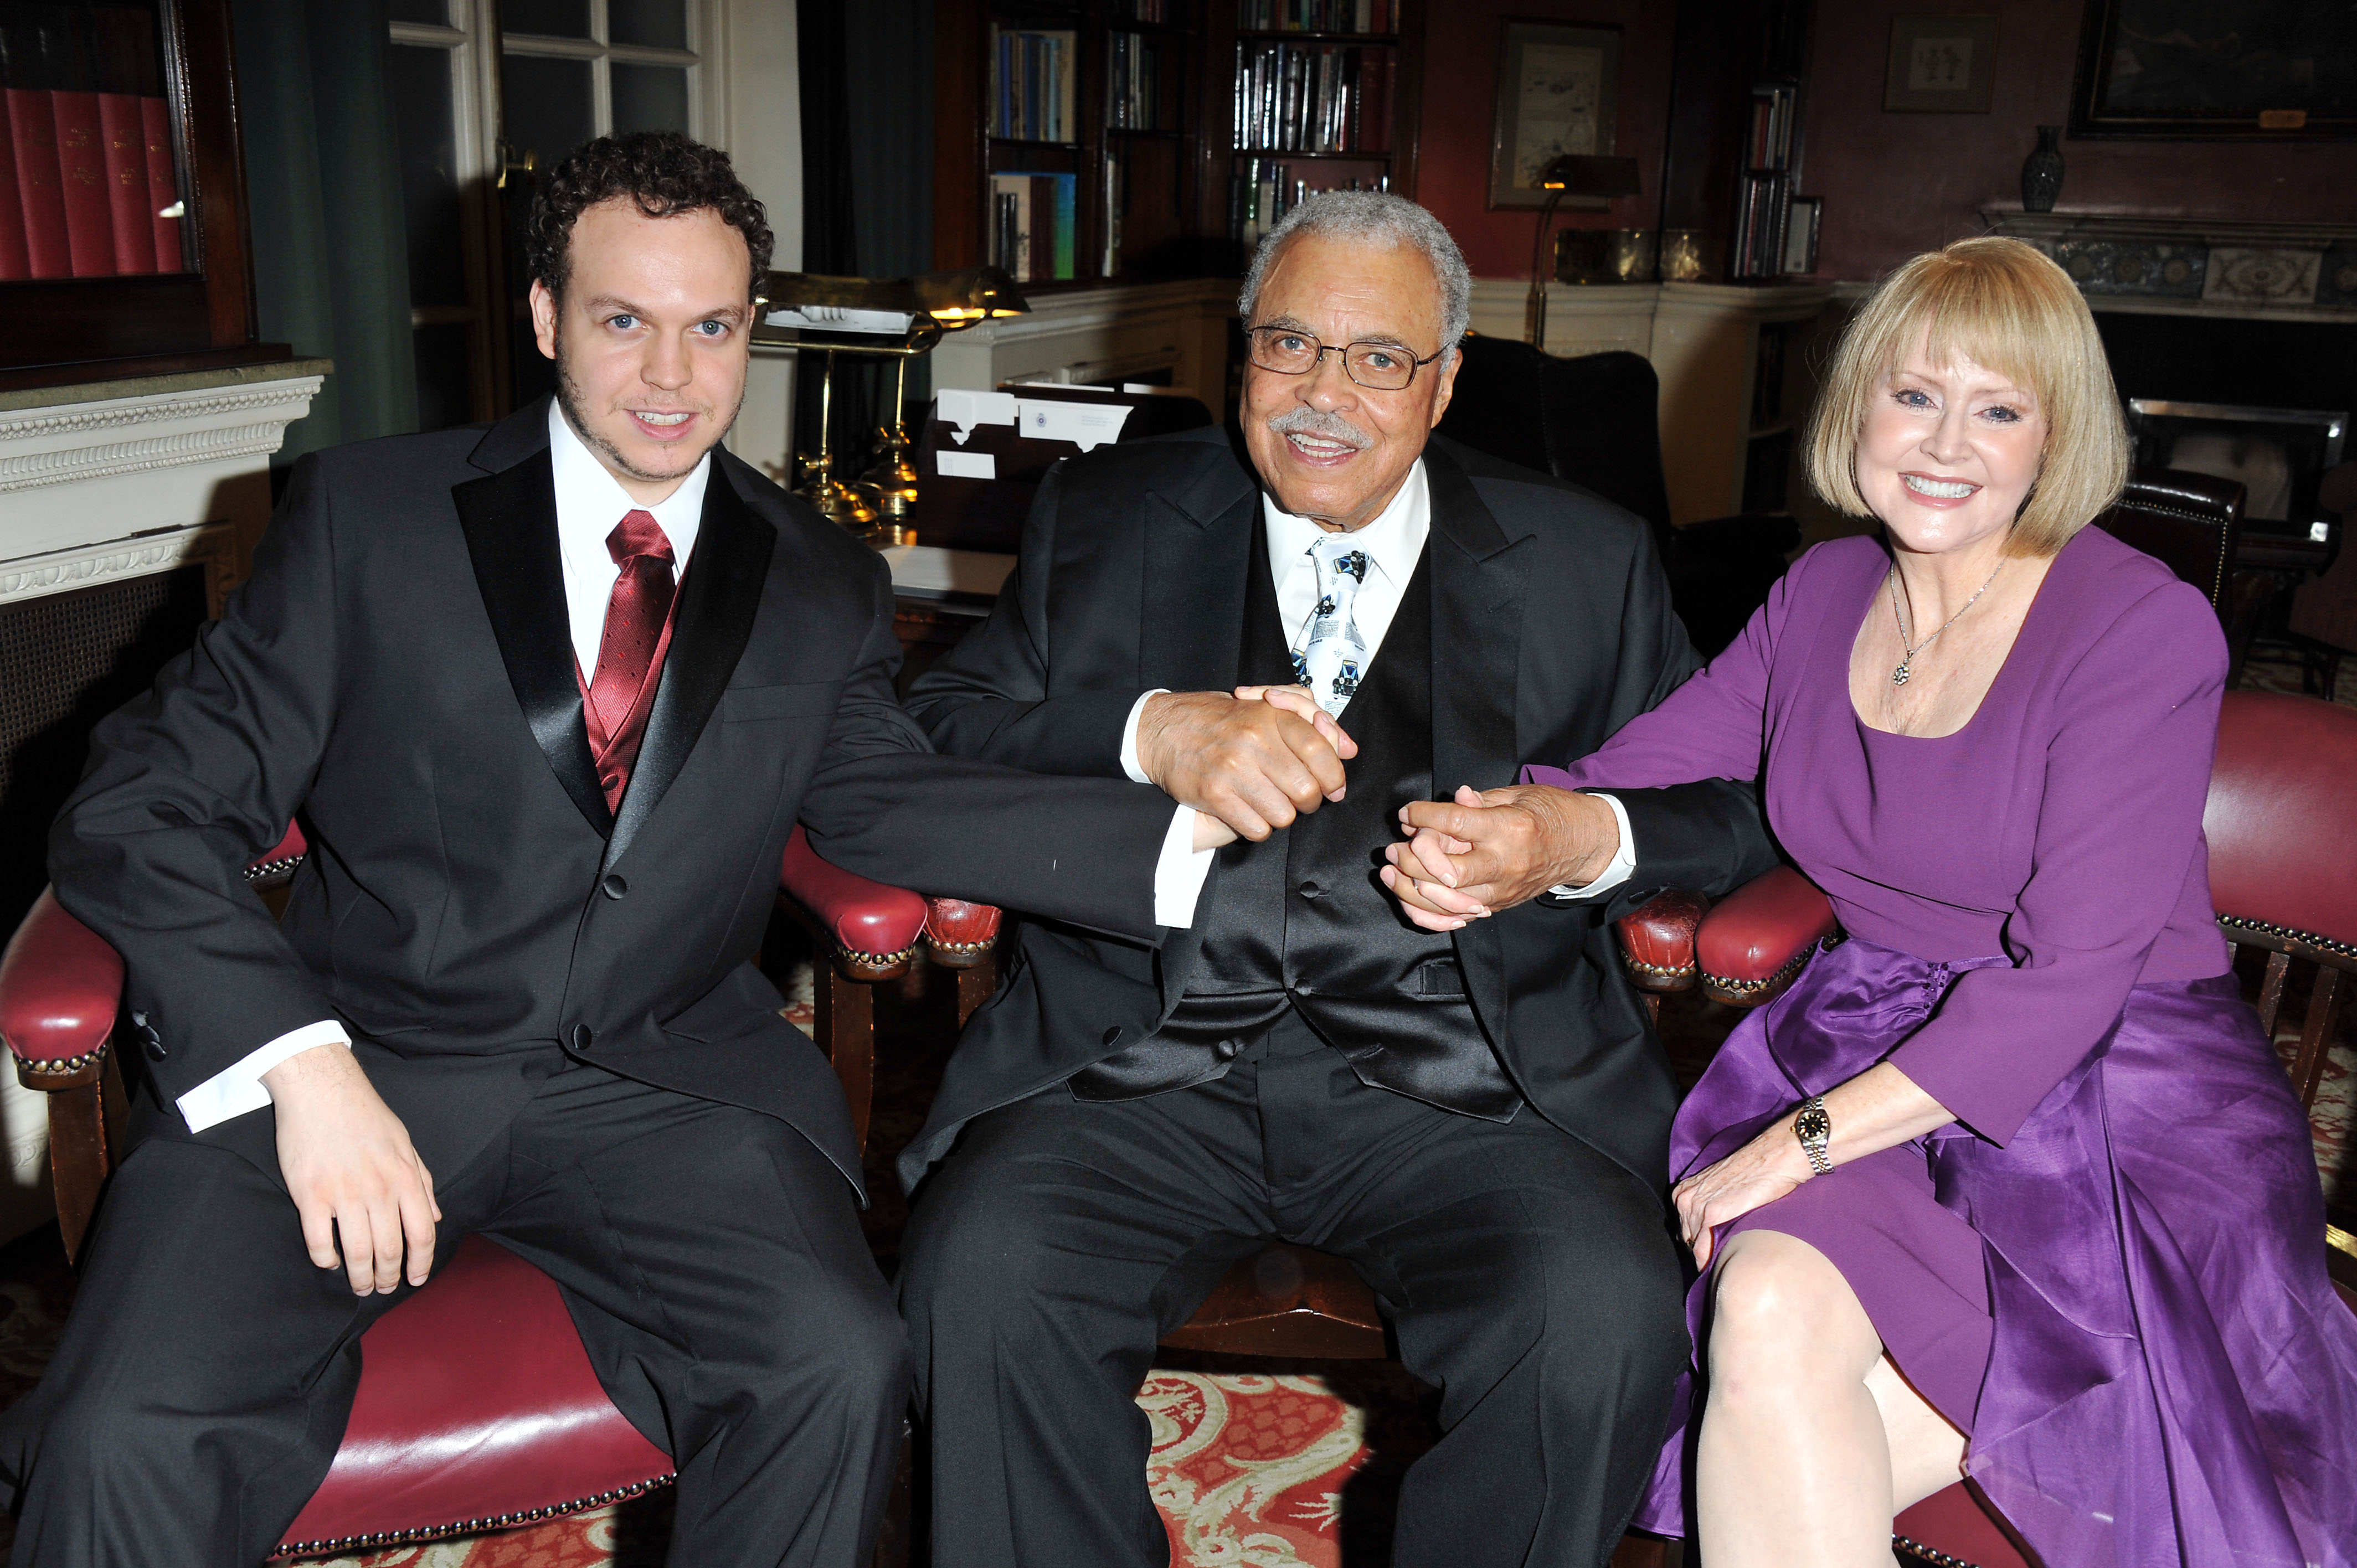 Flynn Earl Jones, James Earl Jones and Cecilia Hart attend the after party for the opening of Driving Miss Daisy at RAC Club on October 5, 2011, in London, England. | Source: Getty Images